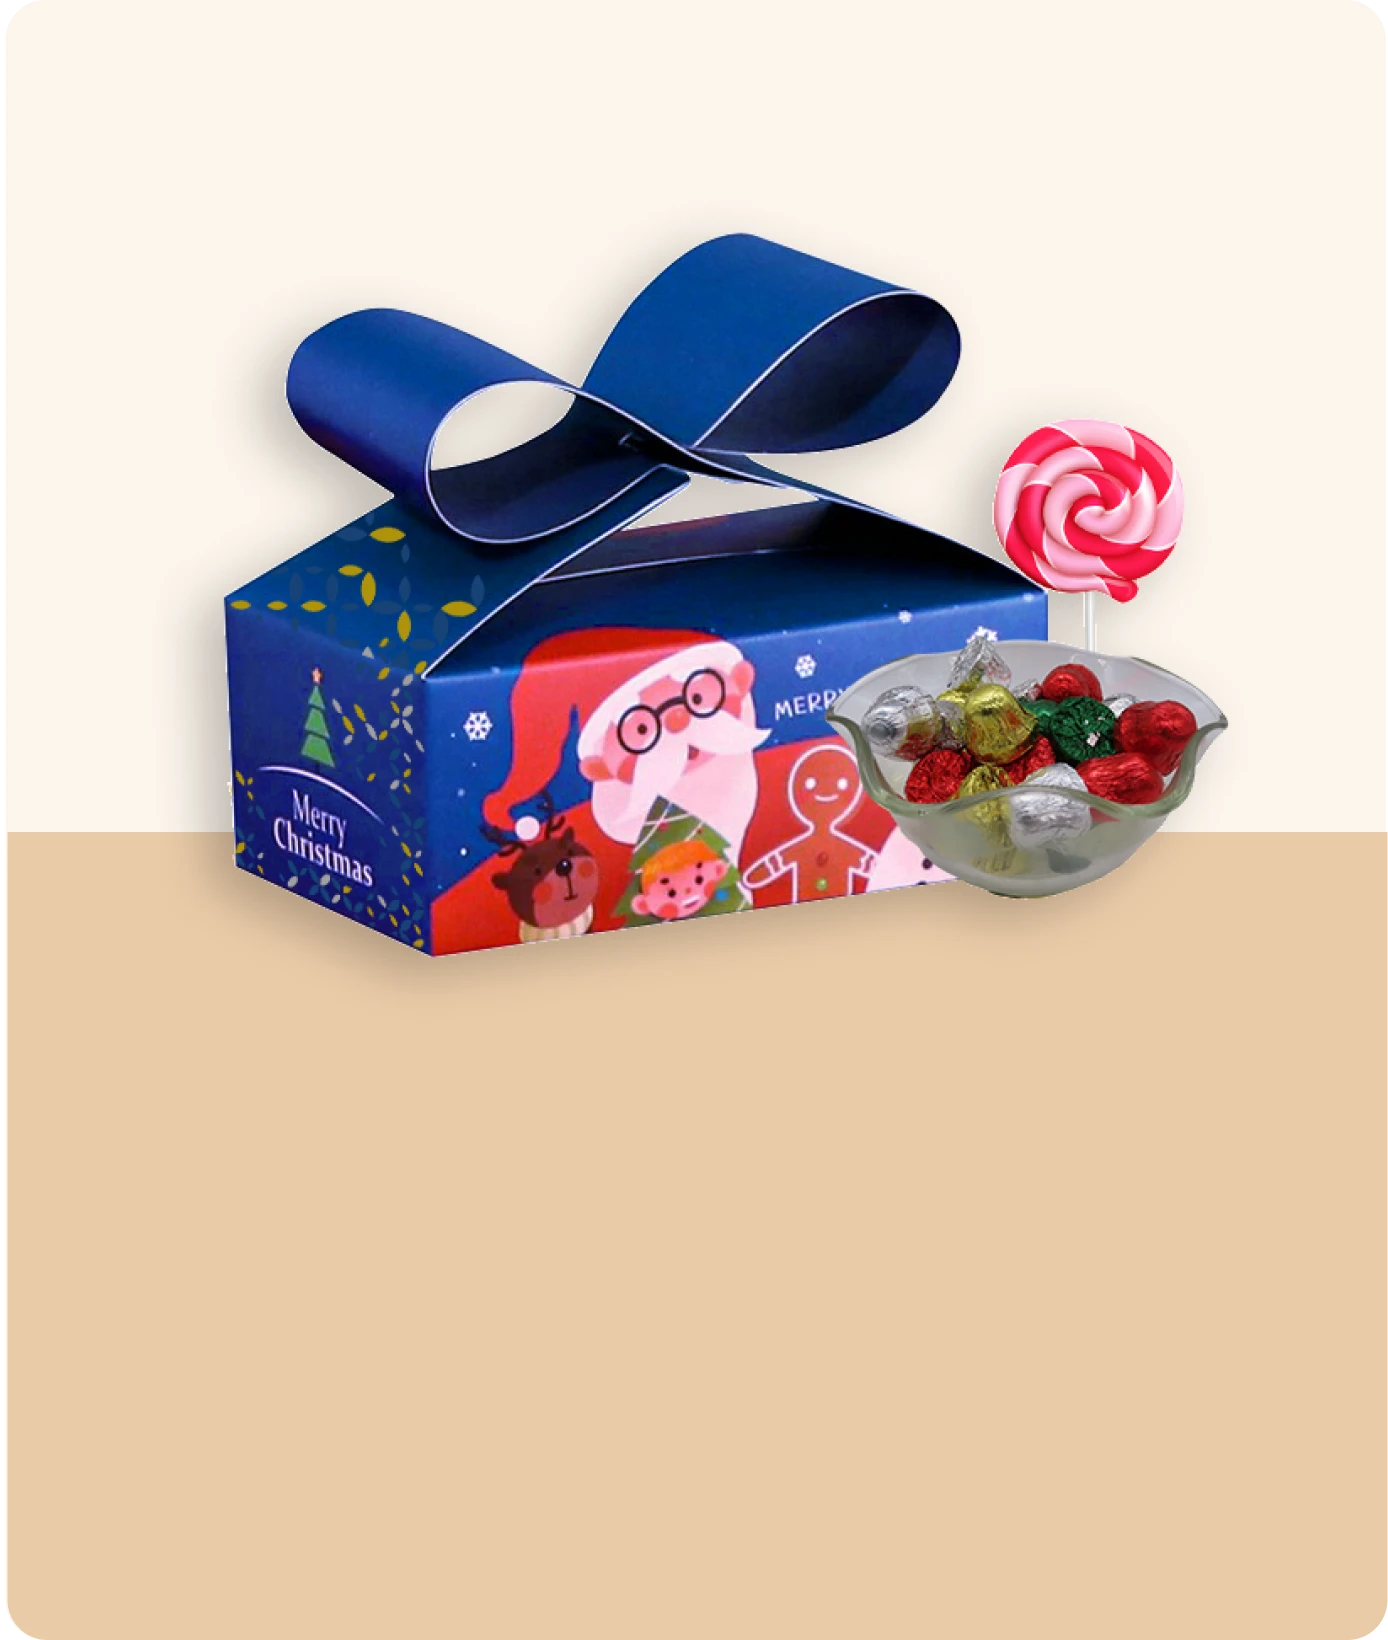 Christmas Candy Boxes related products image | The Box Lane